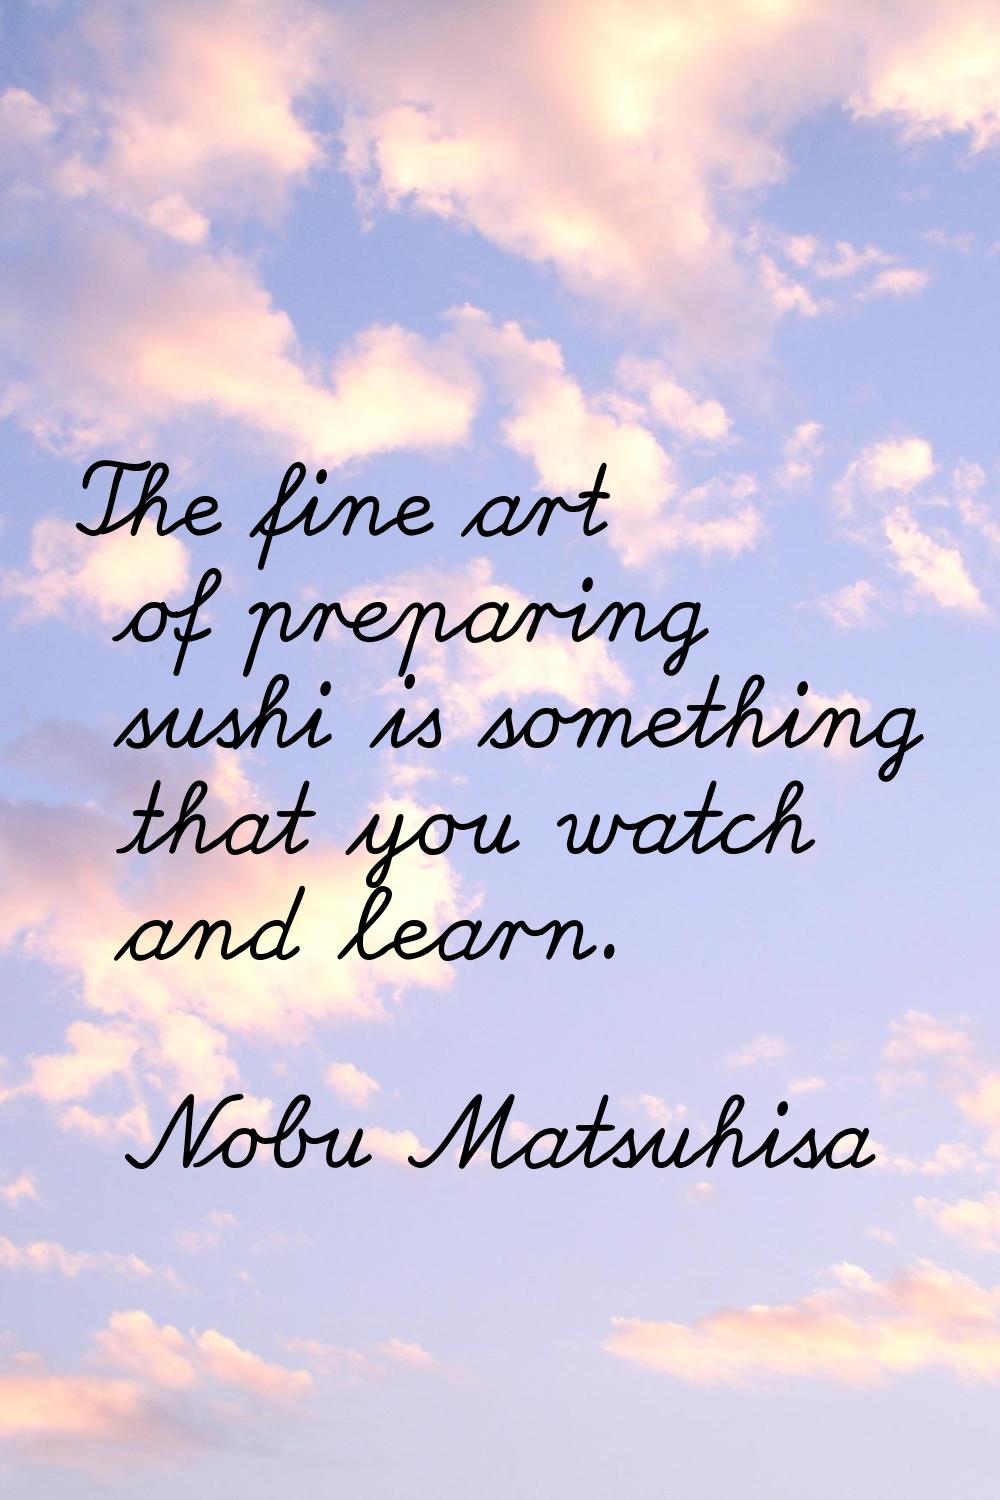 The fine art of preparing sushi is something that you watch and learn.